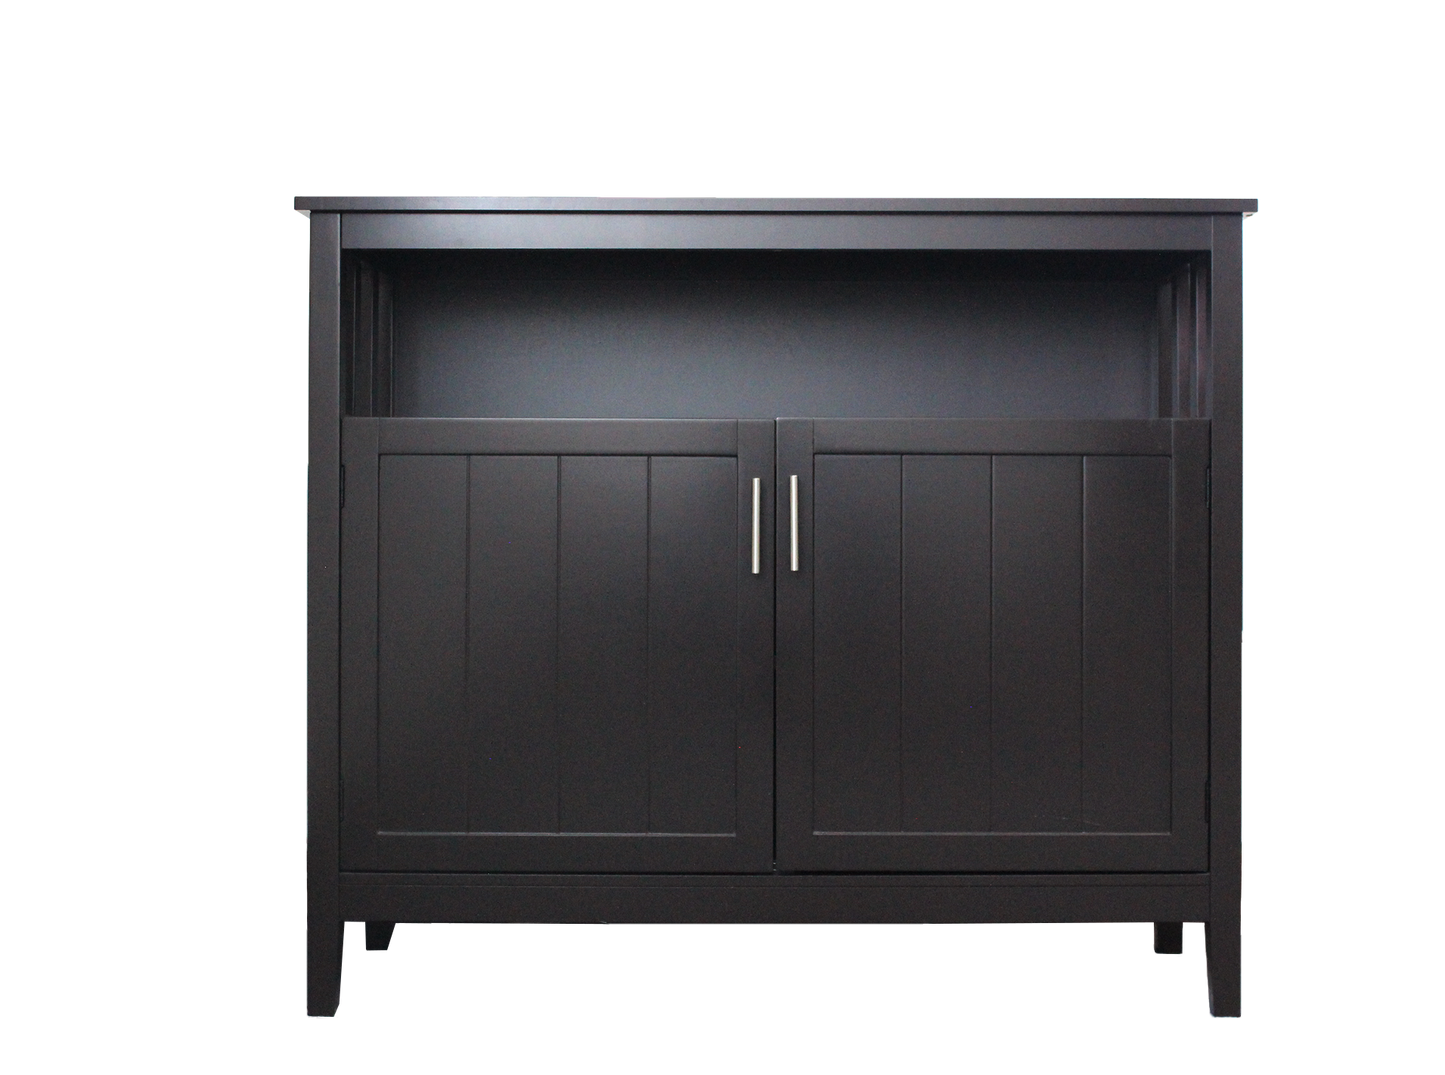 Storage Sideboard And Buffet Server Cabinet-Brown Color